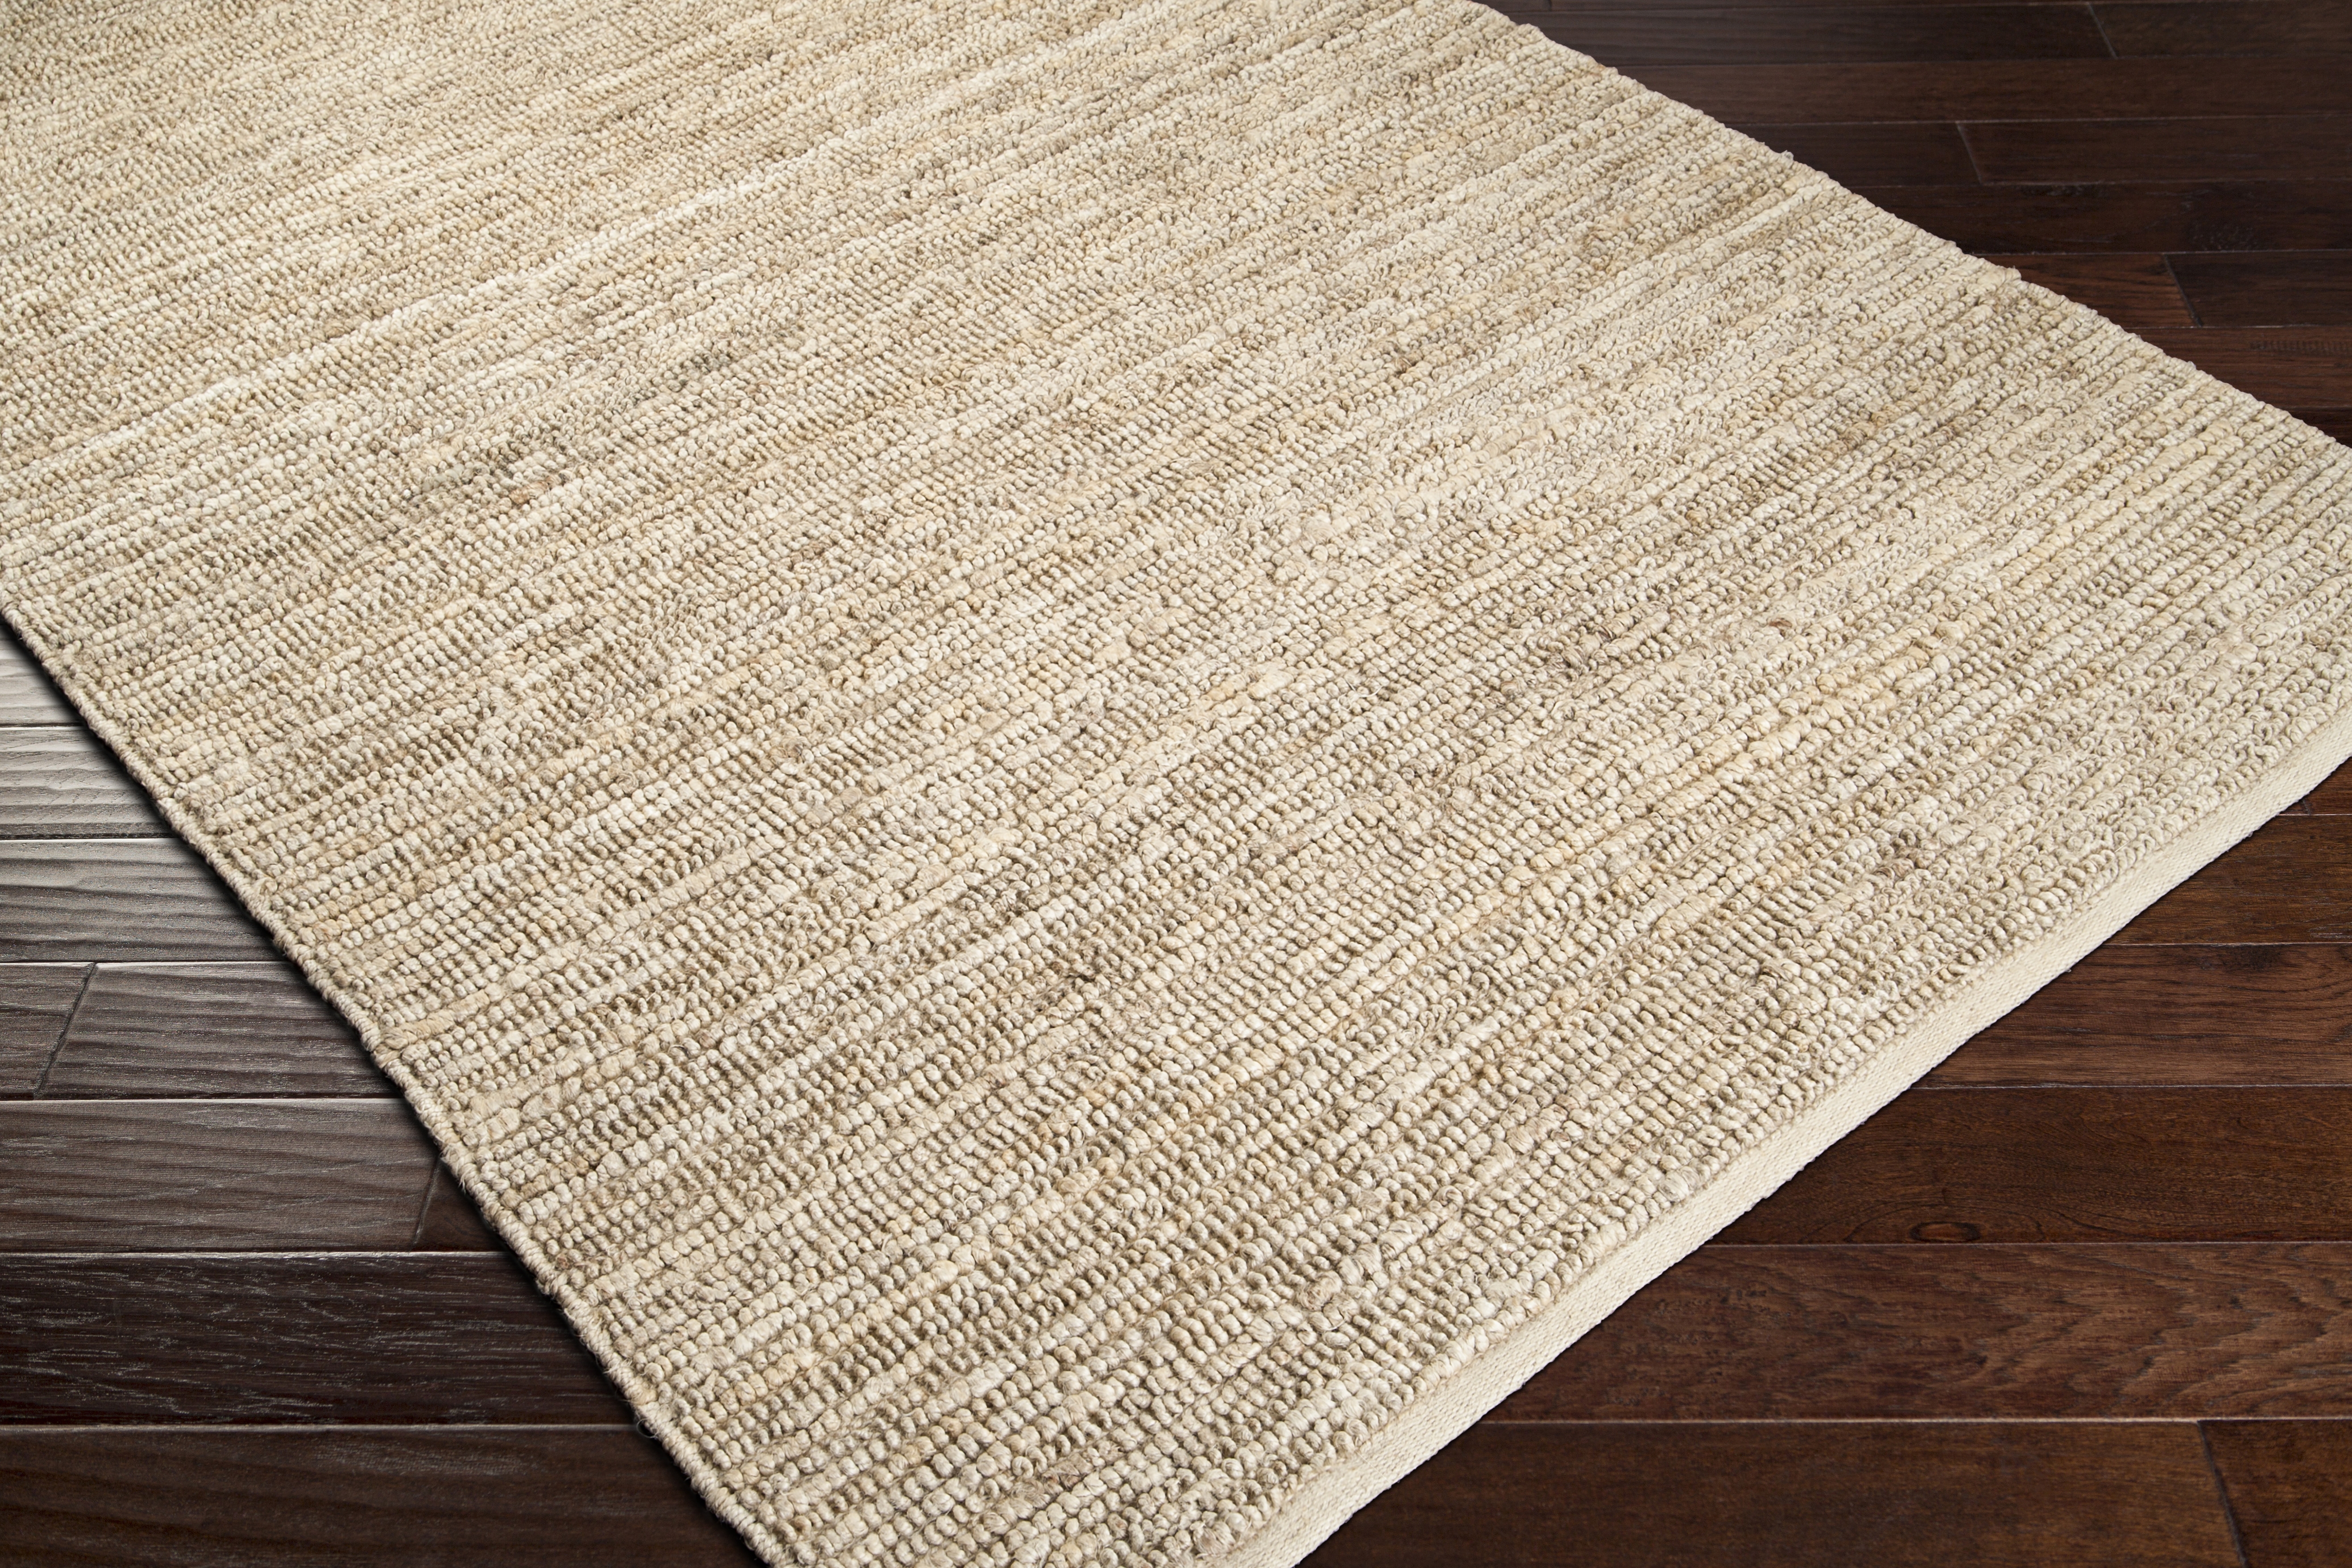 Continental Rug, 2' x 3' - Image 6